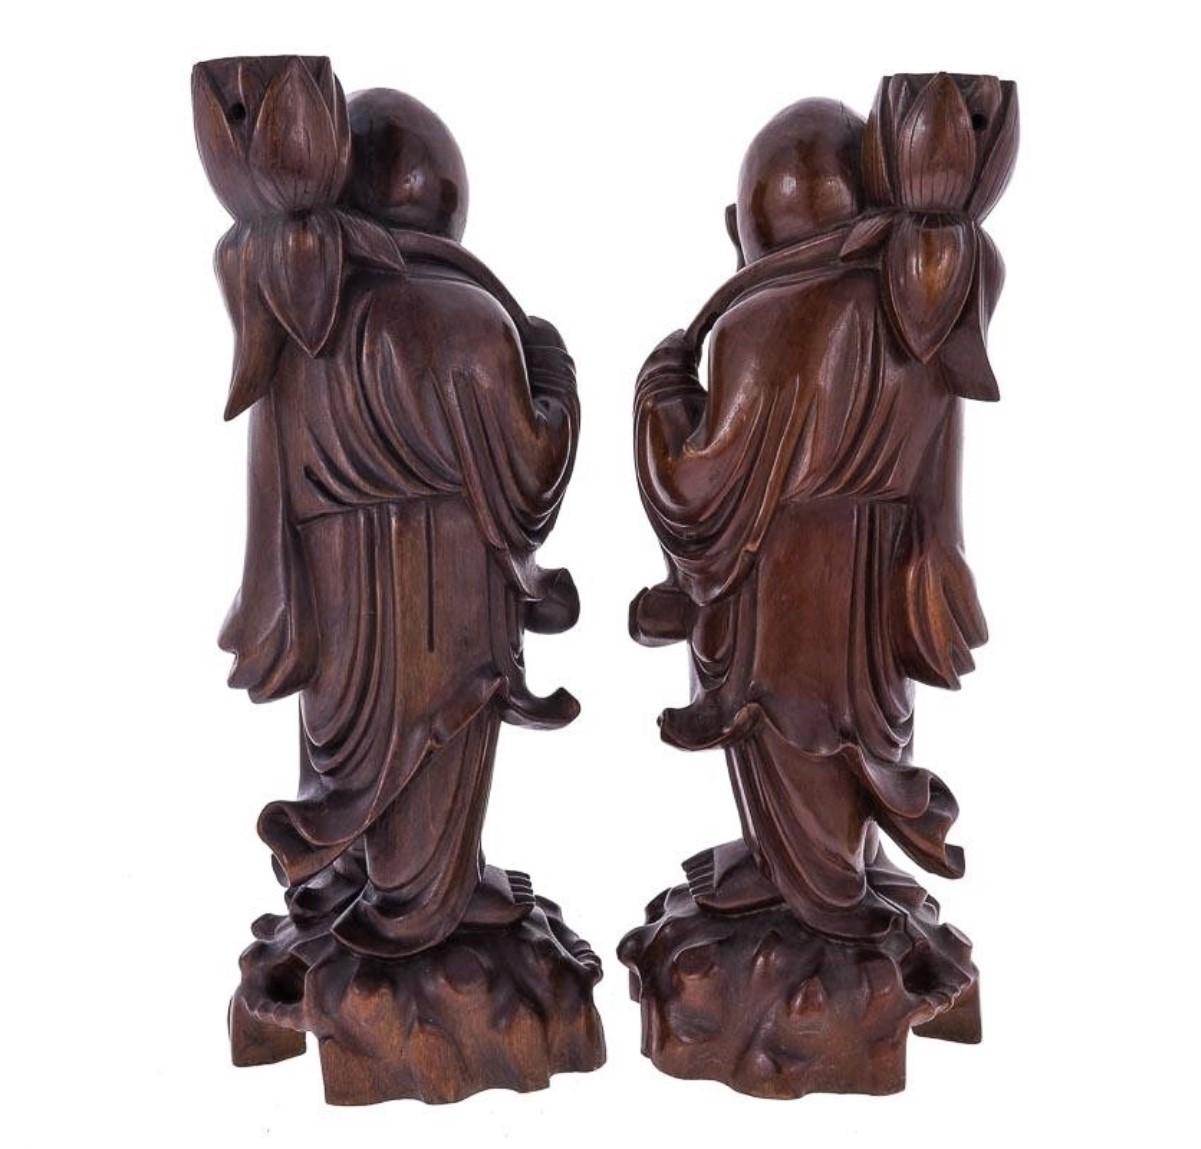 Early 20th century set of two hand carved tamarind wood laughing Buddha candleholders.
Measures: Height 15